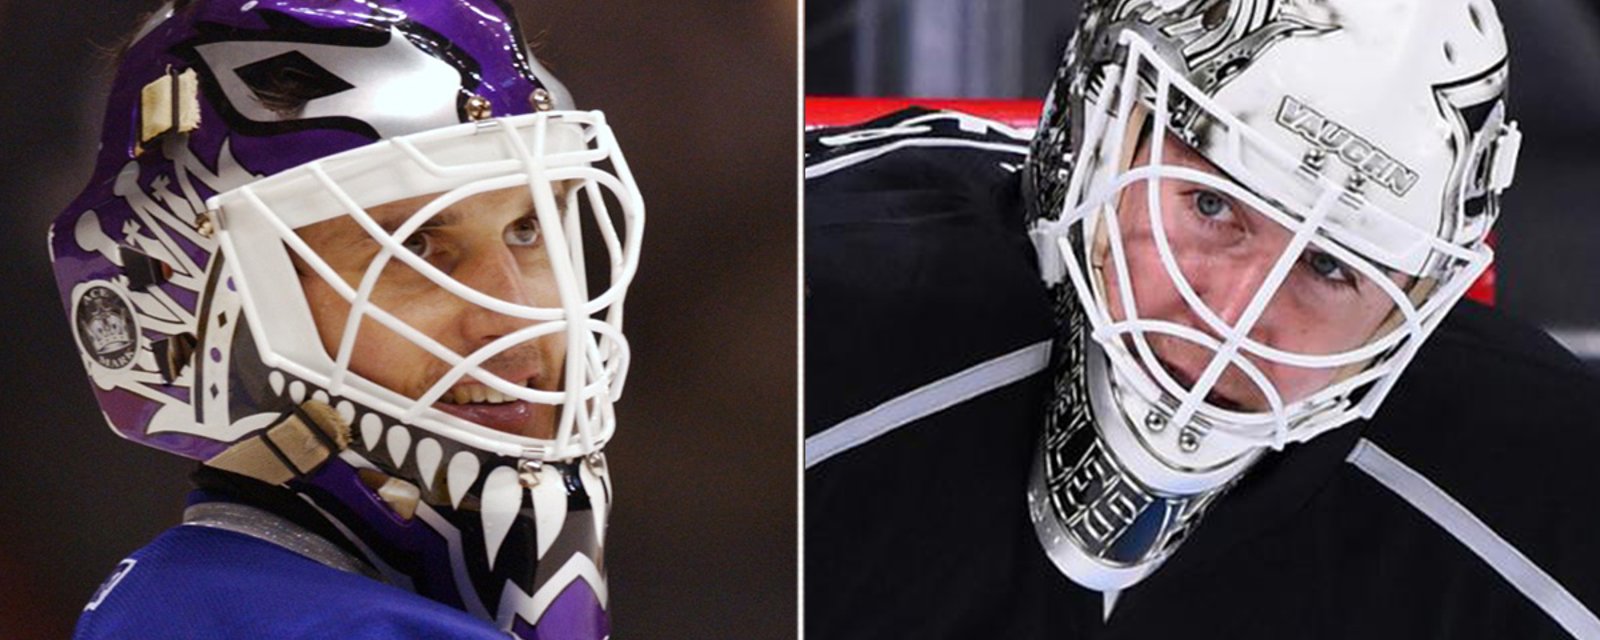 Must See: Kings' Zatkoff pays homage to Felix Potvin with new mask